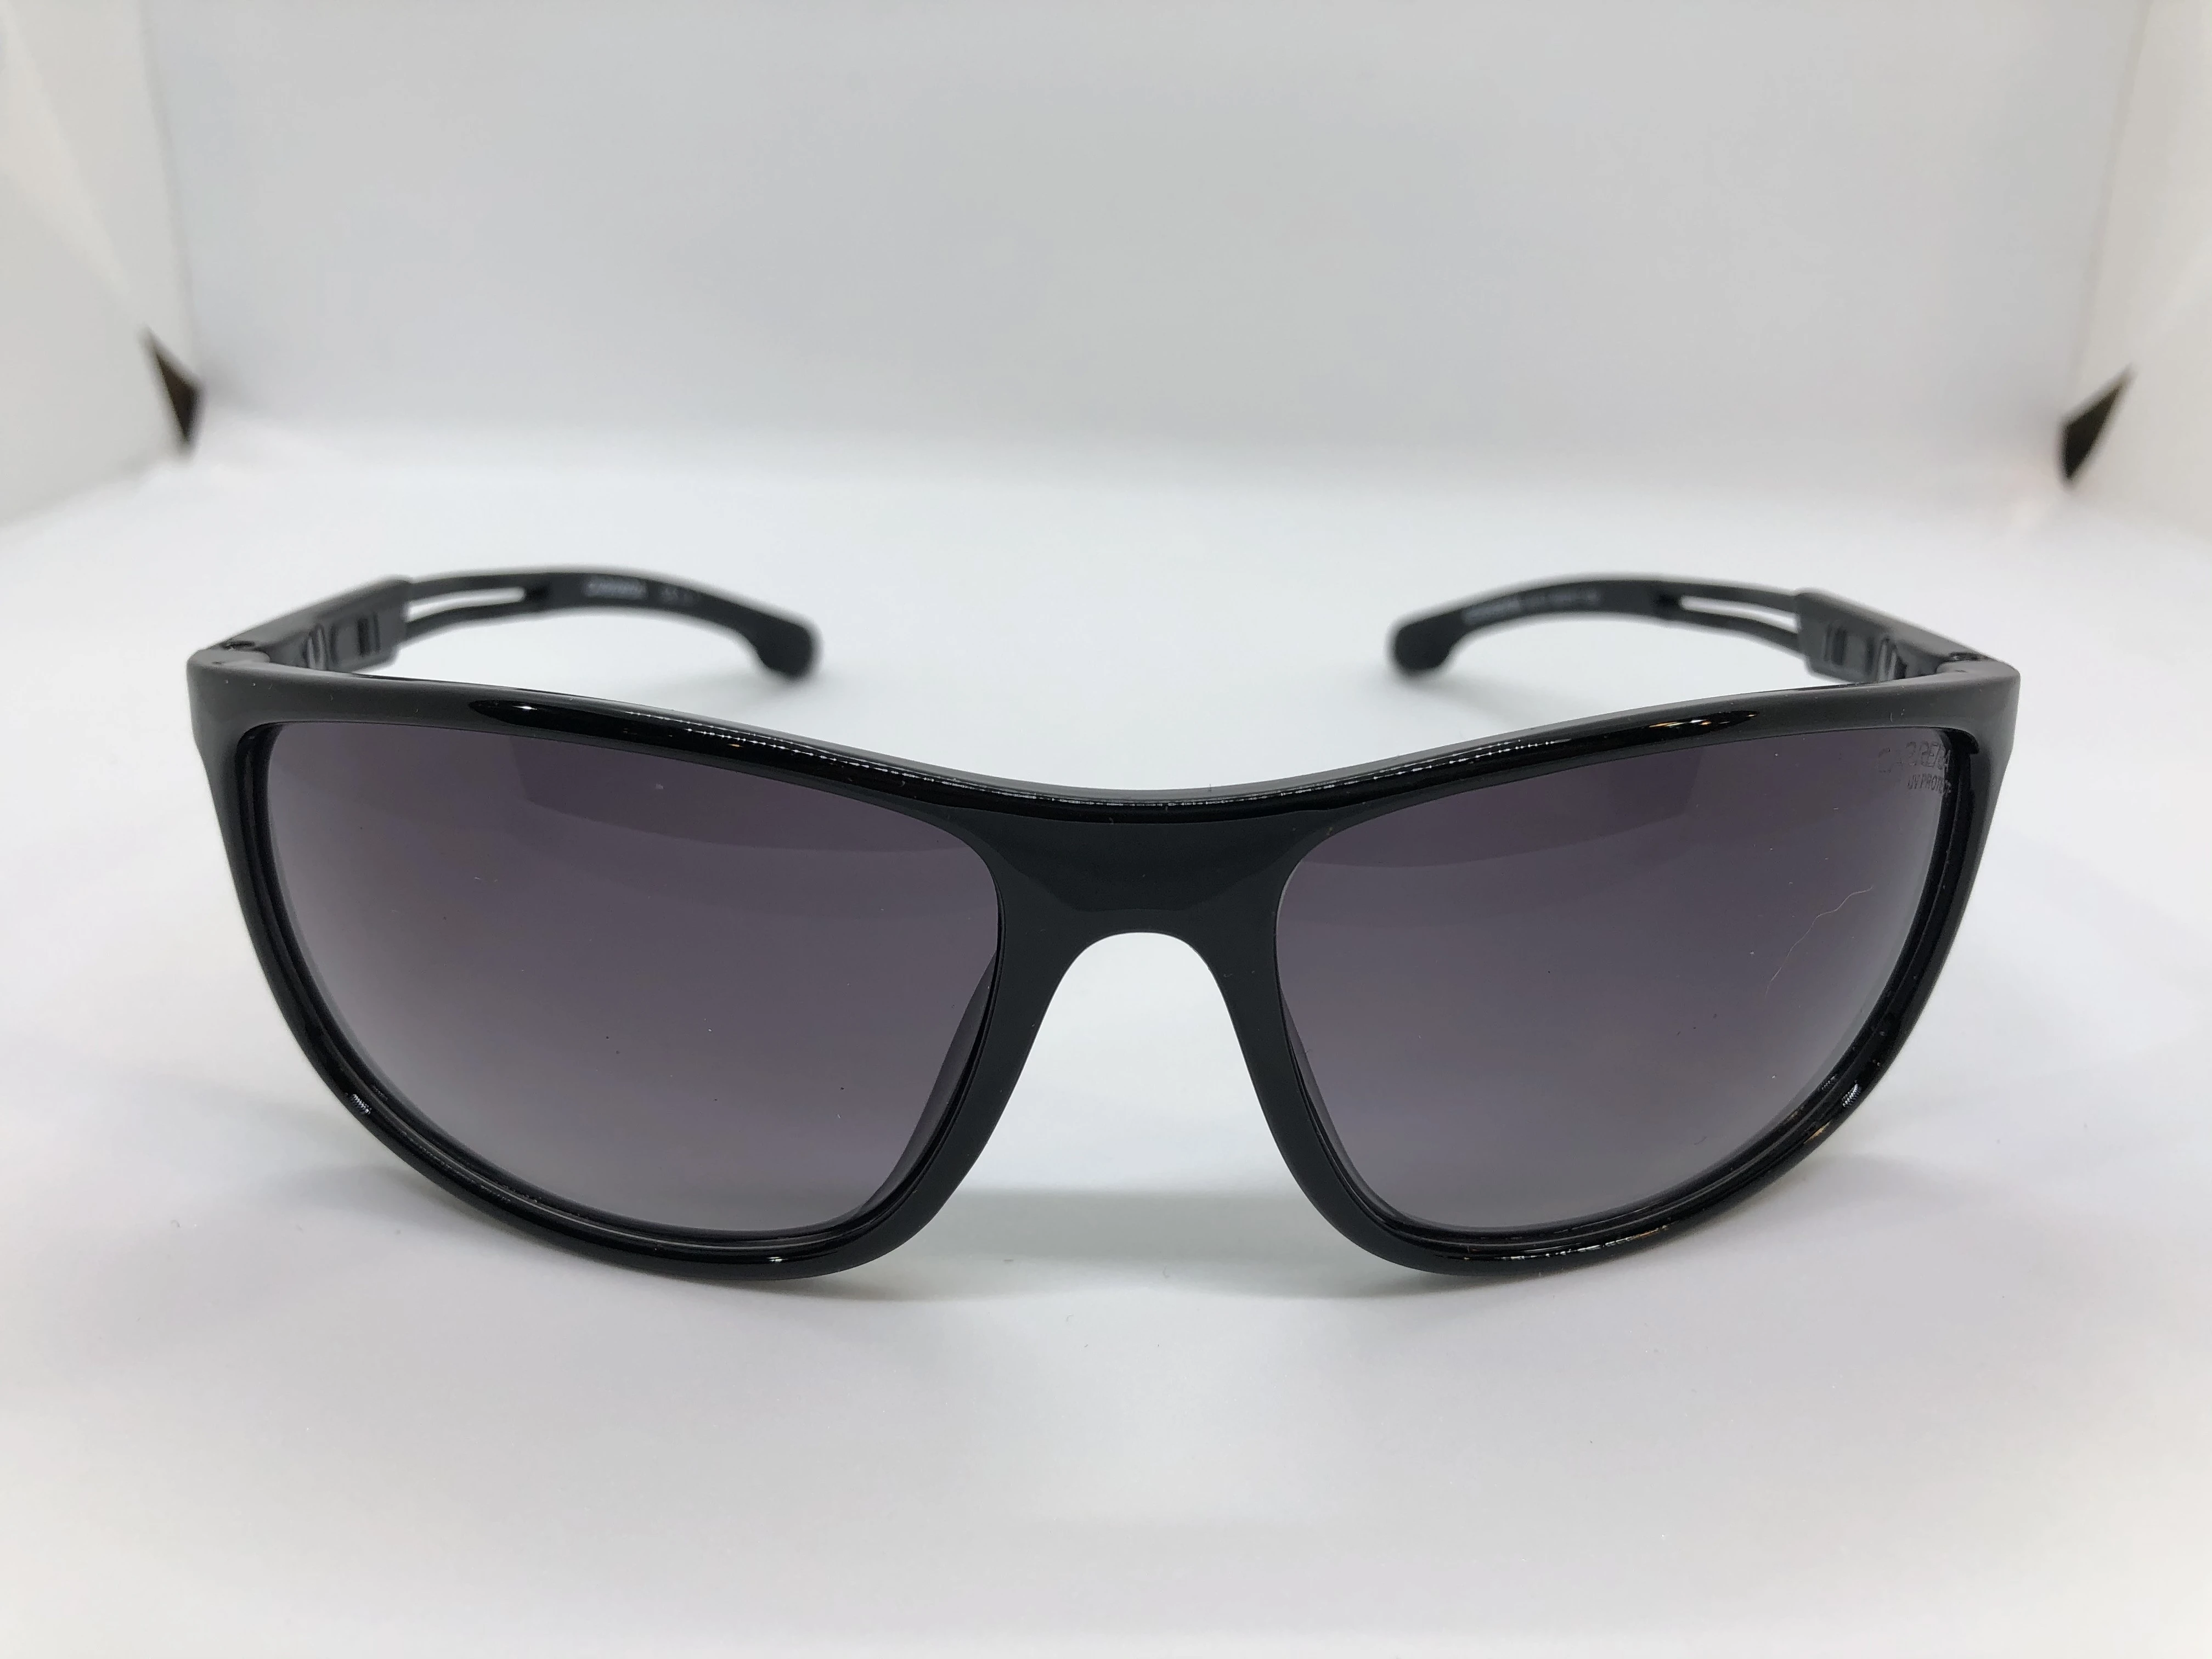 Sunglasses - from Carrera - with black polycarbonate frame - black gradient lenses - and black metal * polycarbonate arm - for men